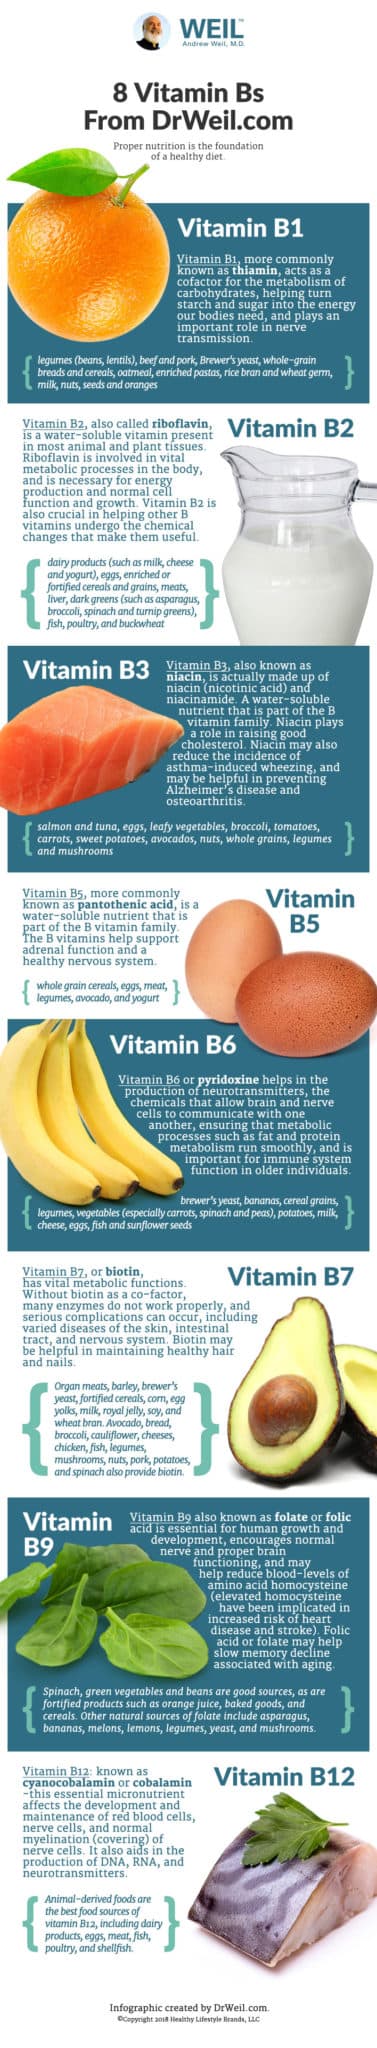 Foods rich in different B-Vitamins